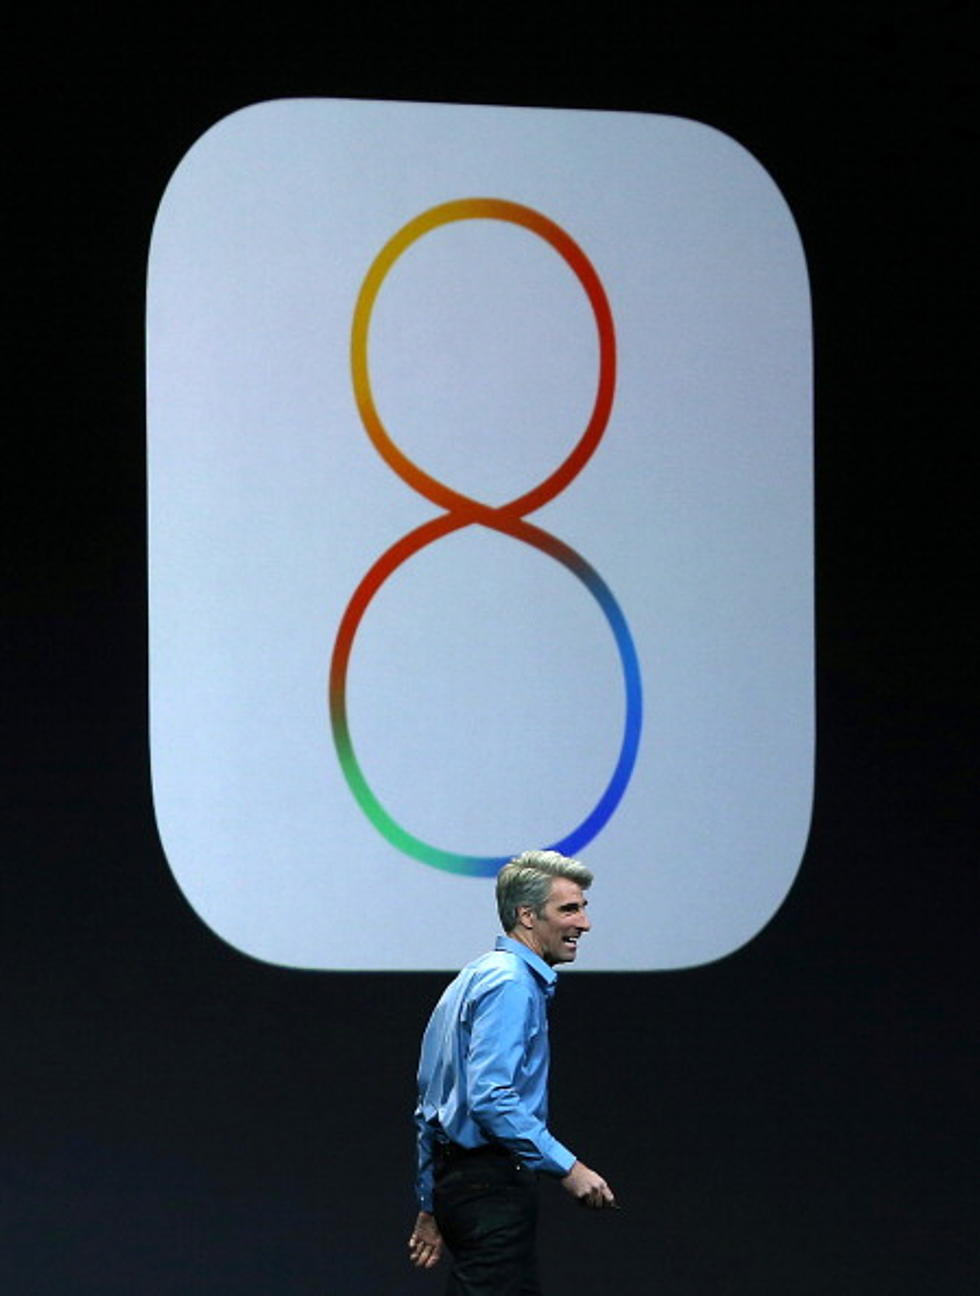 IOS 8 Is SOS From Apple